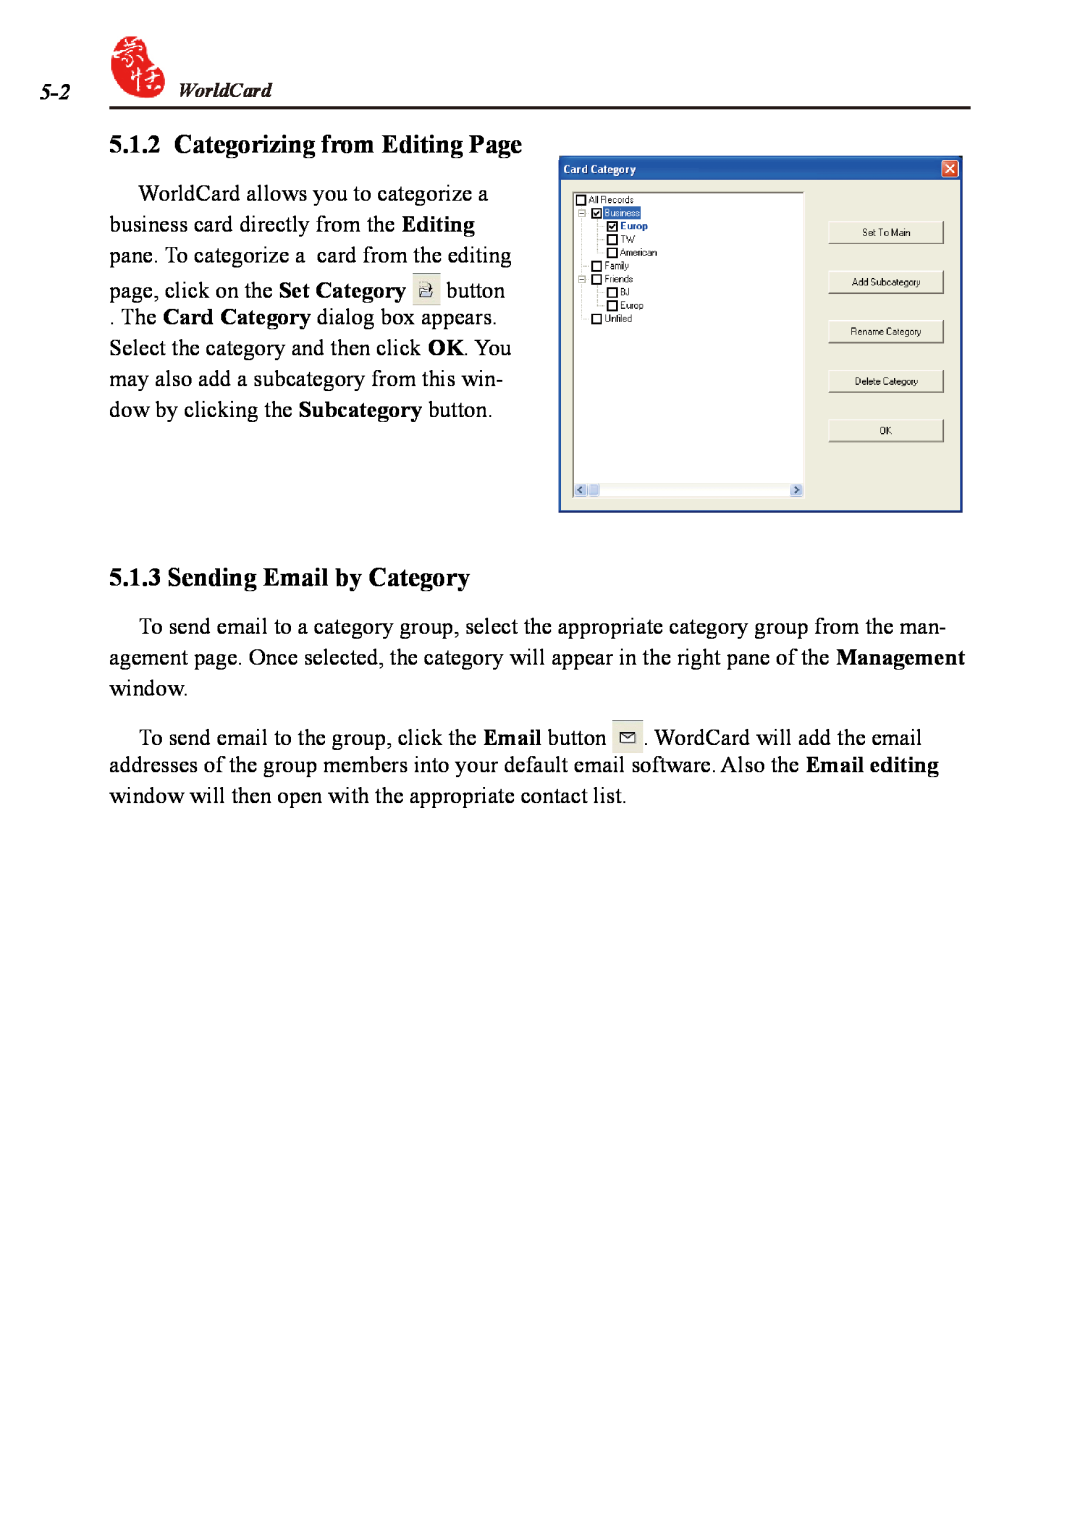 Penpower duet 2 user manual Categorizing from Editing Page, Sending Email by Category 